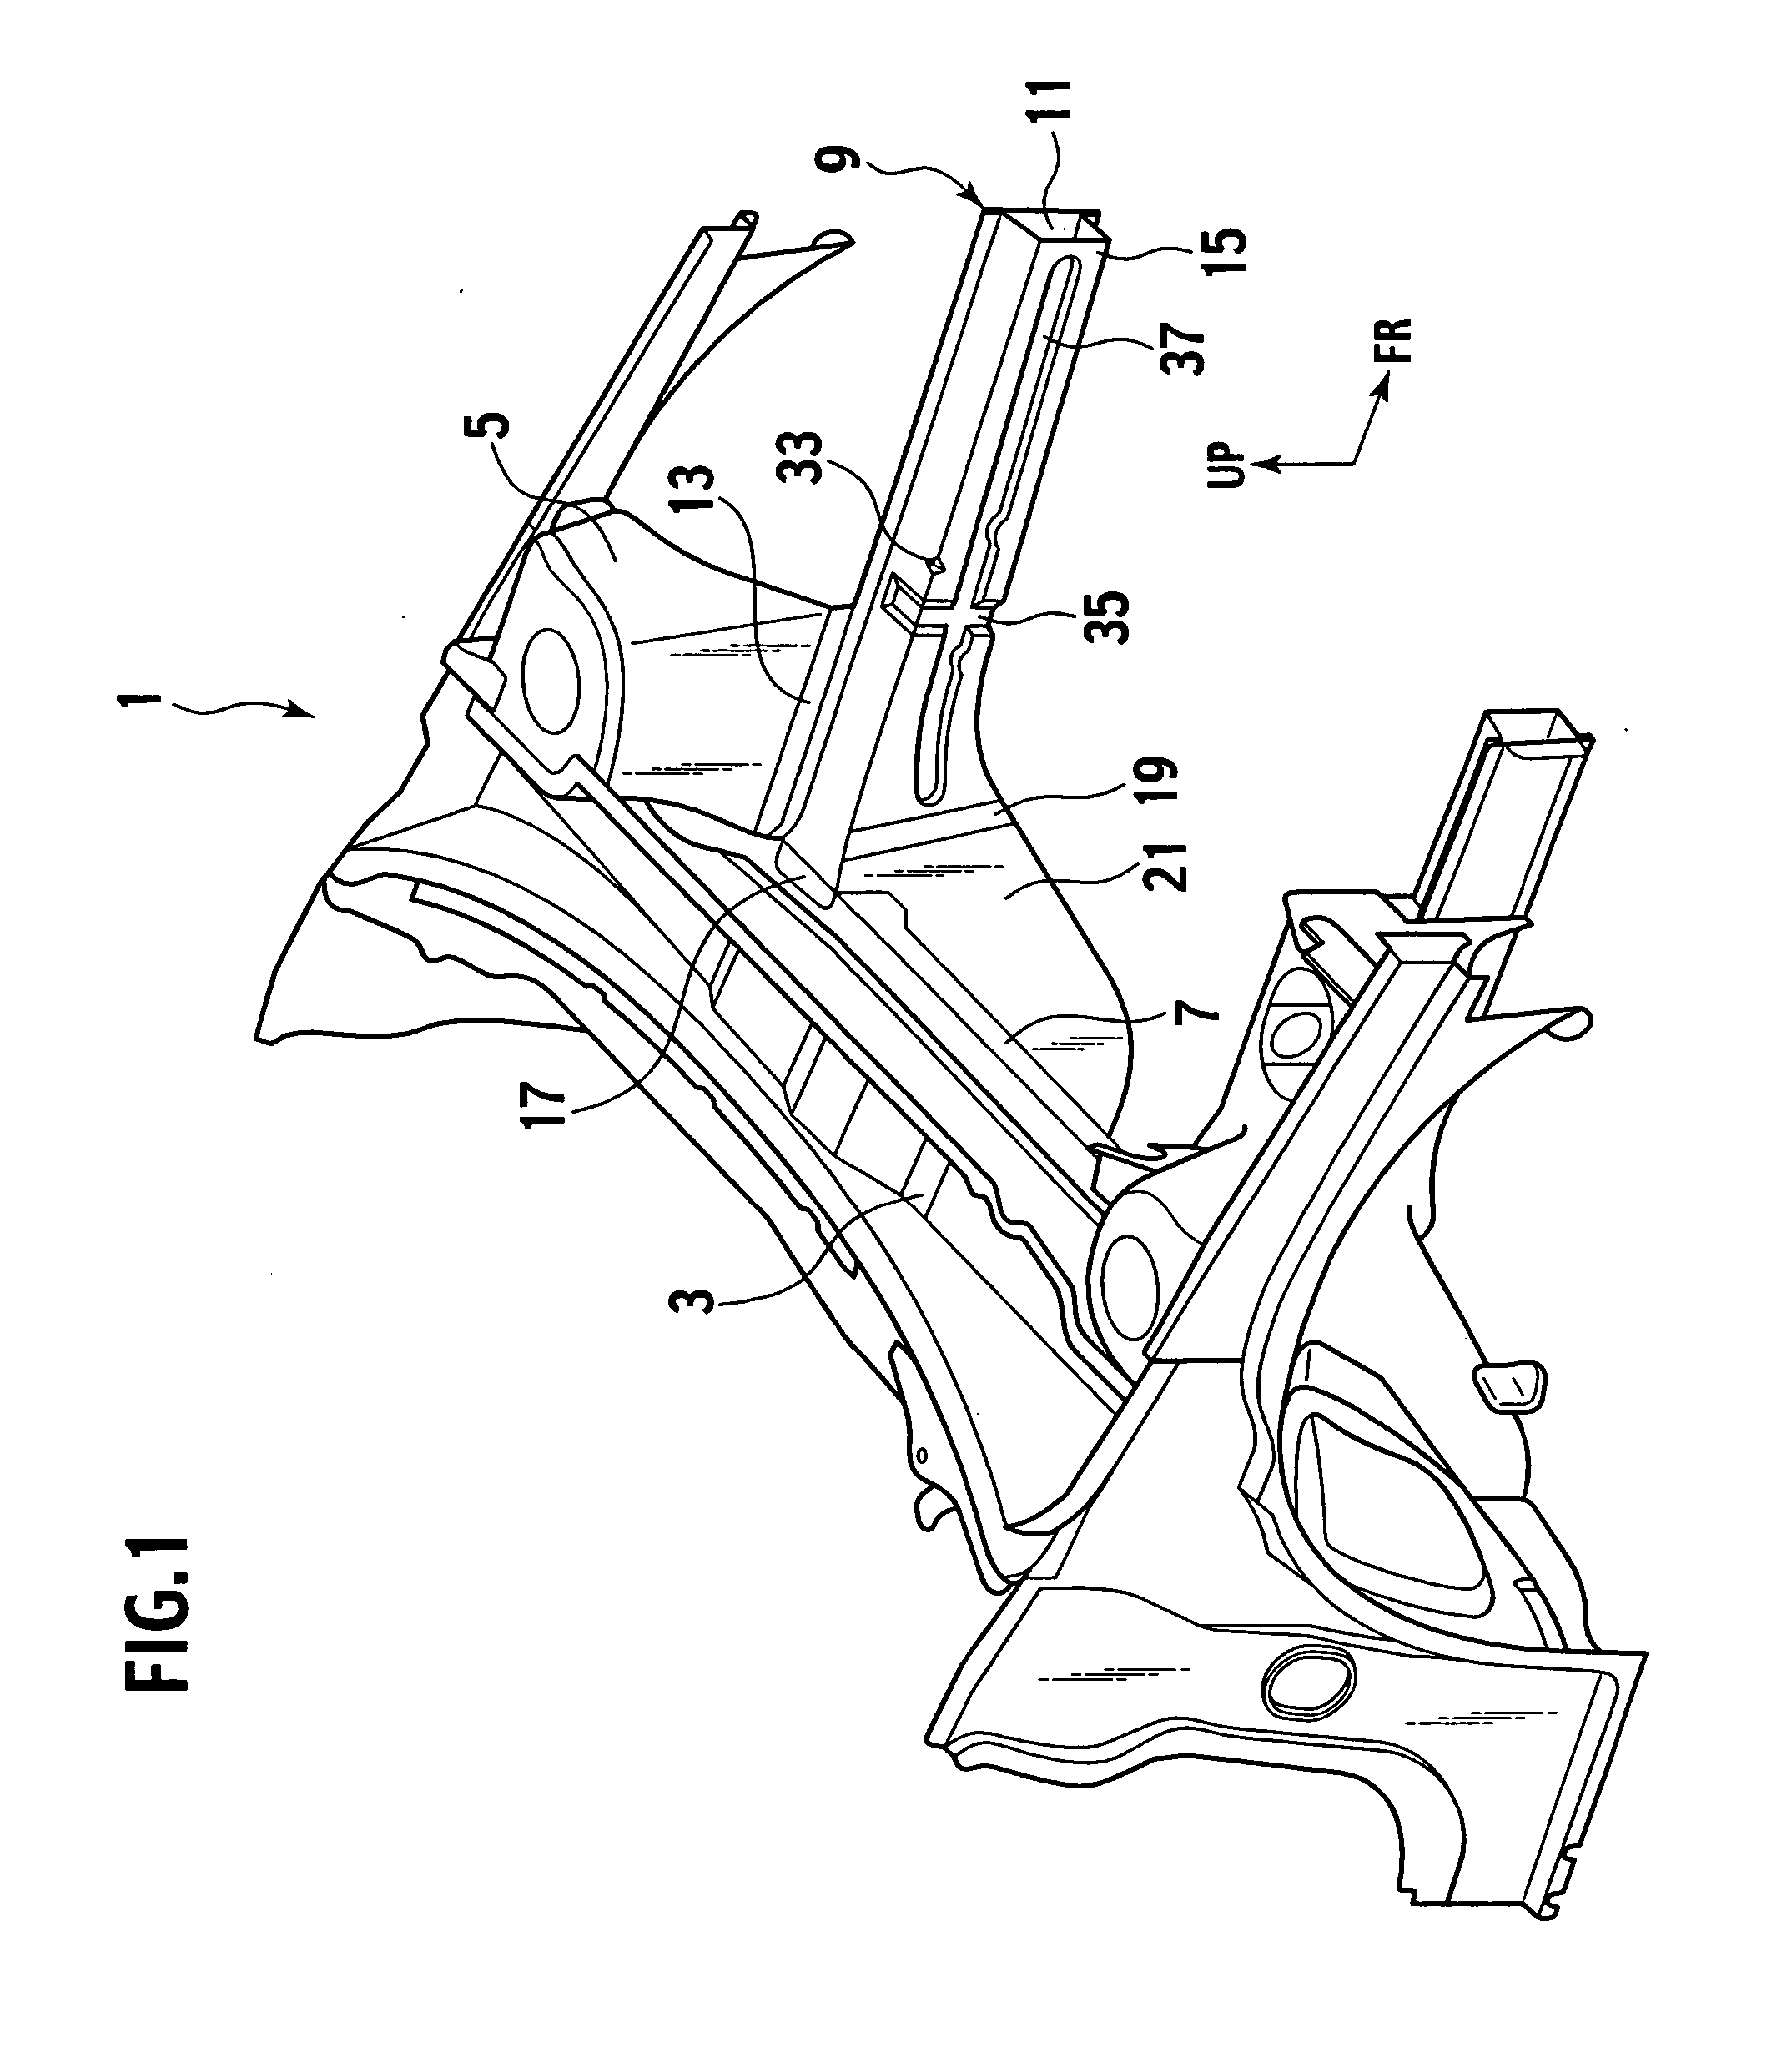 Impact energy absorbing structure of vehicle frame member